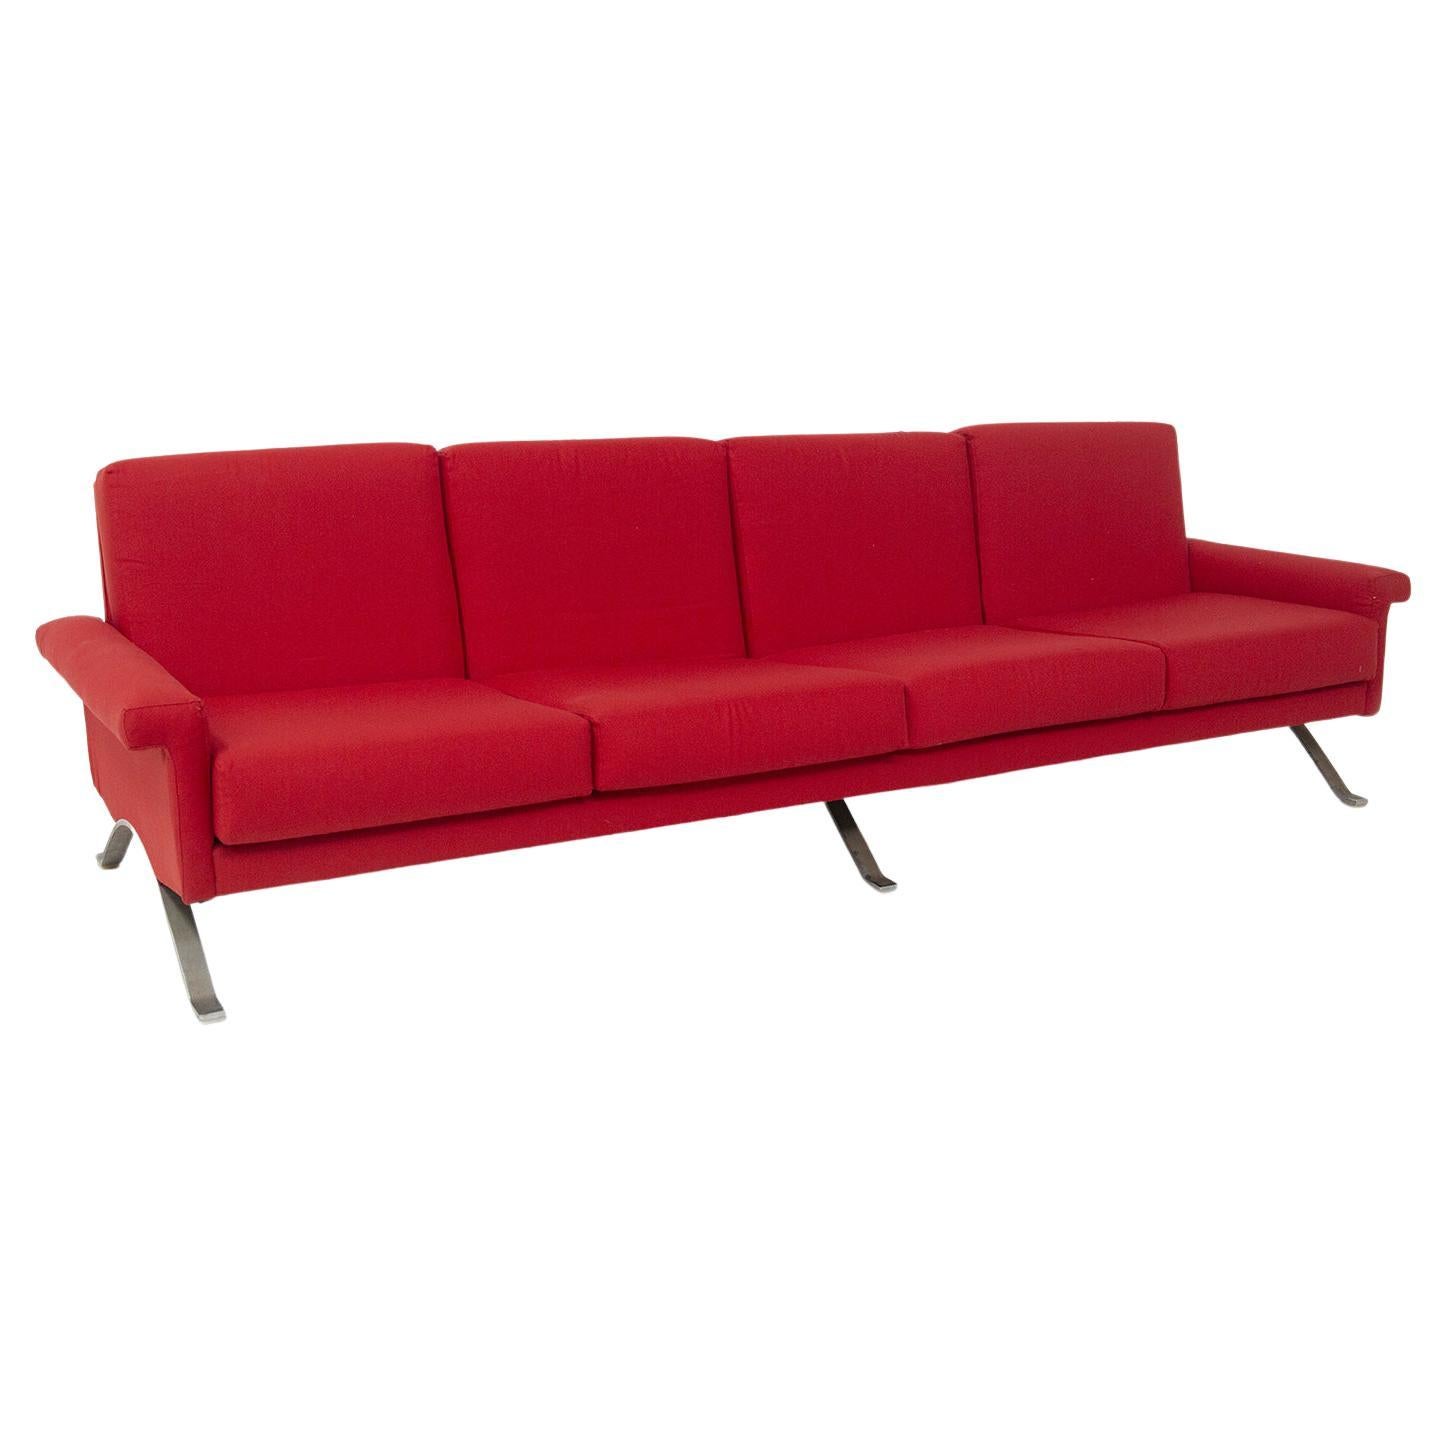 Rare Italian Red Sofa by Ico Parisi for Cassina Mod. 875, Published